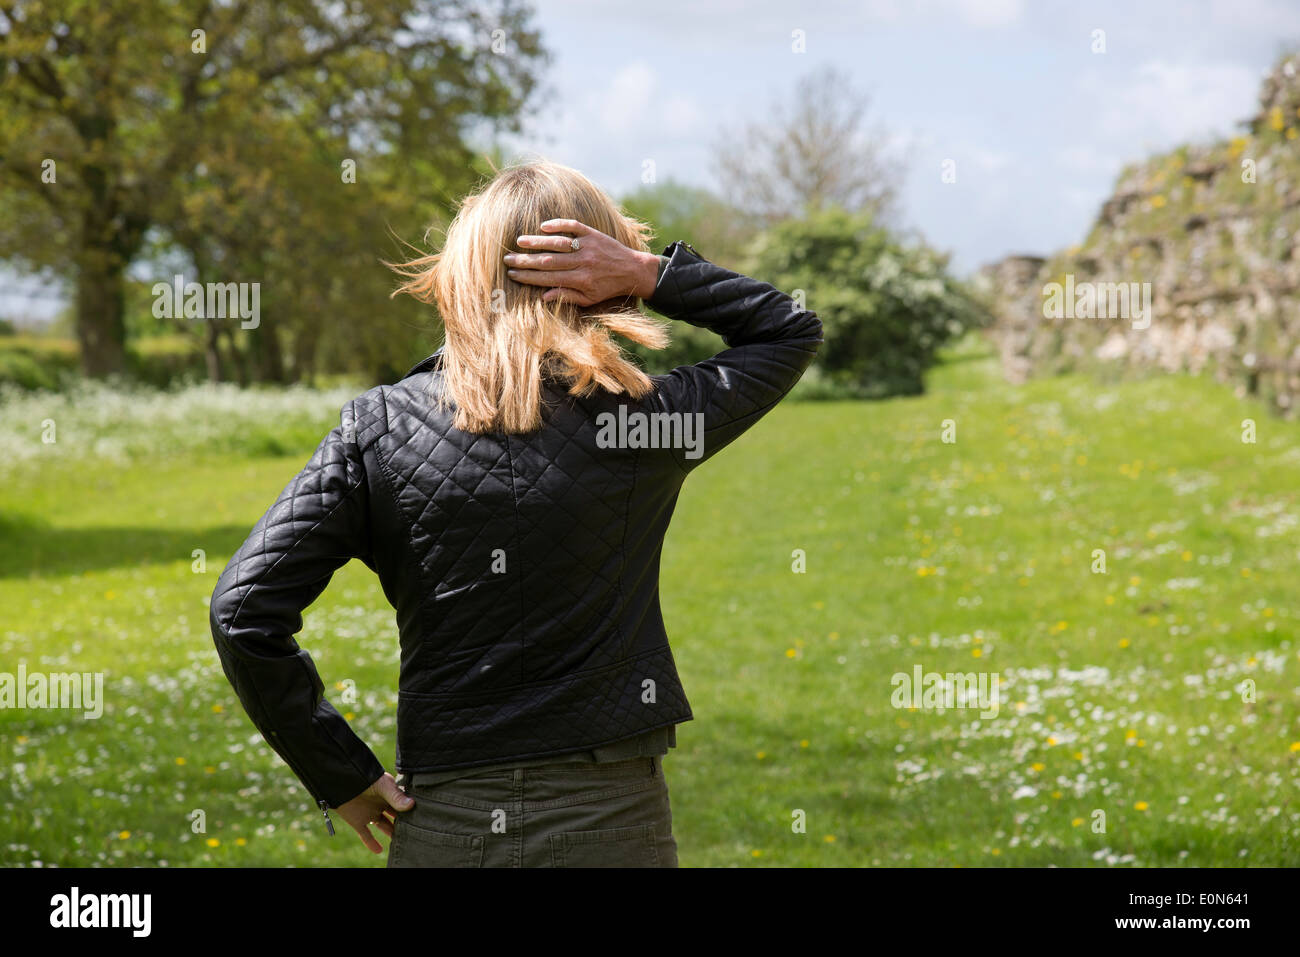 Woman standing alone in a field with back to the camera Stock Photo